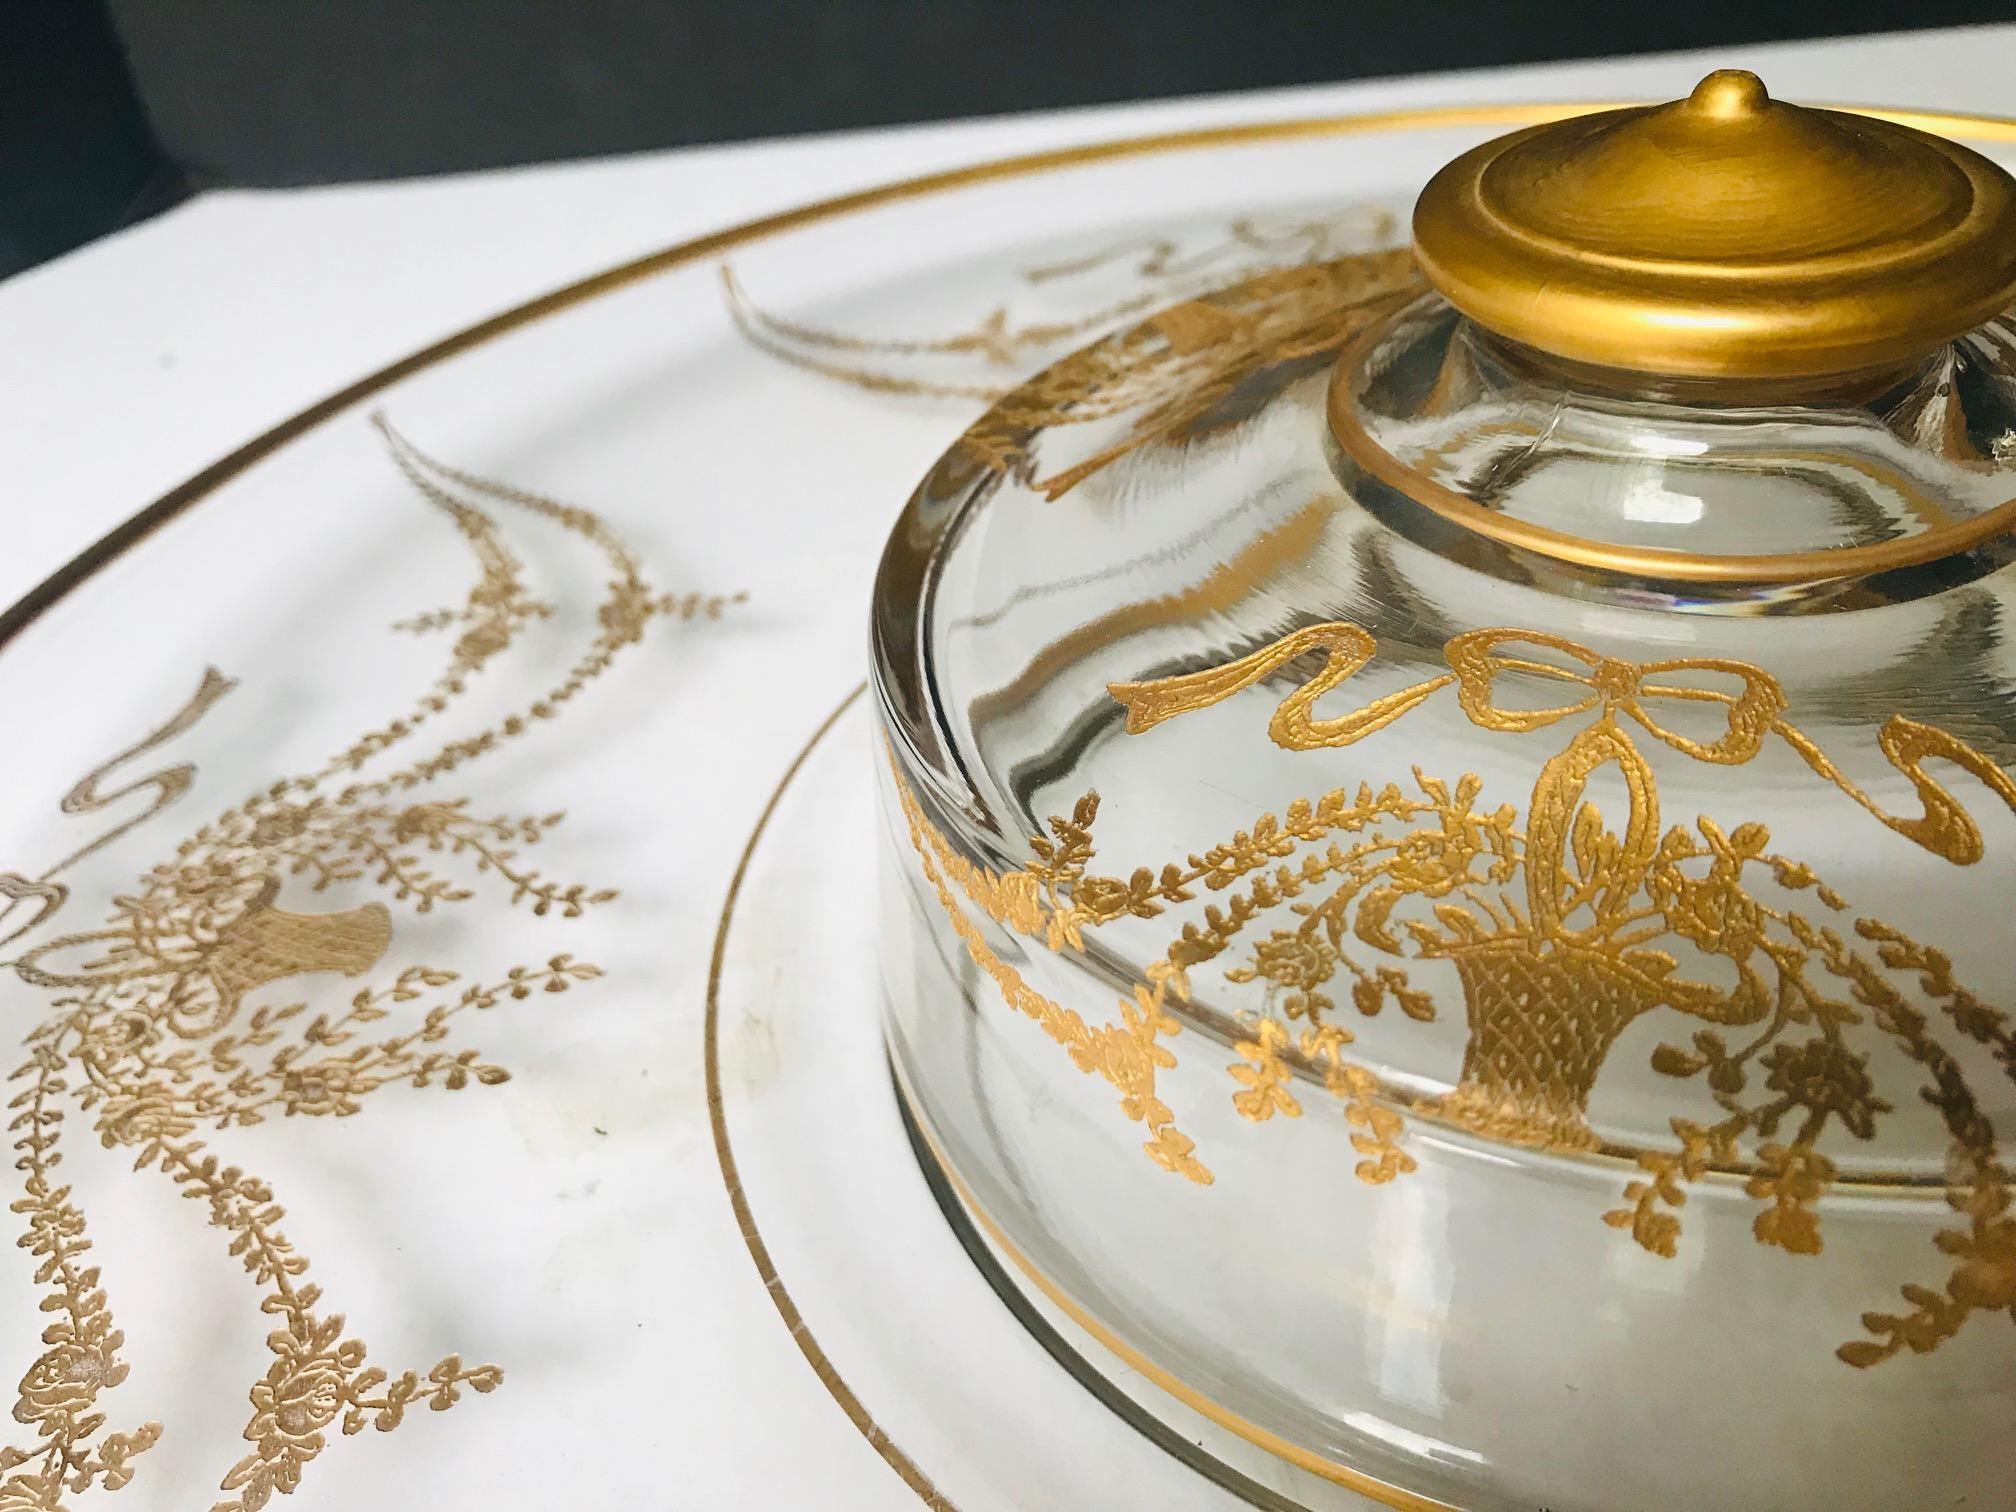 This offer is for a gorgeous and very large Moser Art Glass platter. The serving platter and center cover are intaglio cut with heavy gold inlay. The cut and elaborately gilded decor shows a garland and flower motif. The amazing quality of cutting